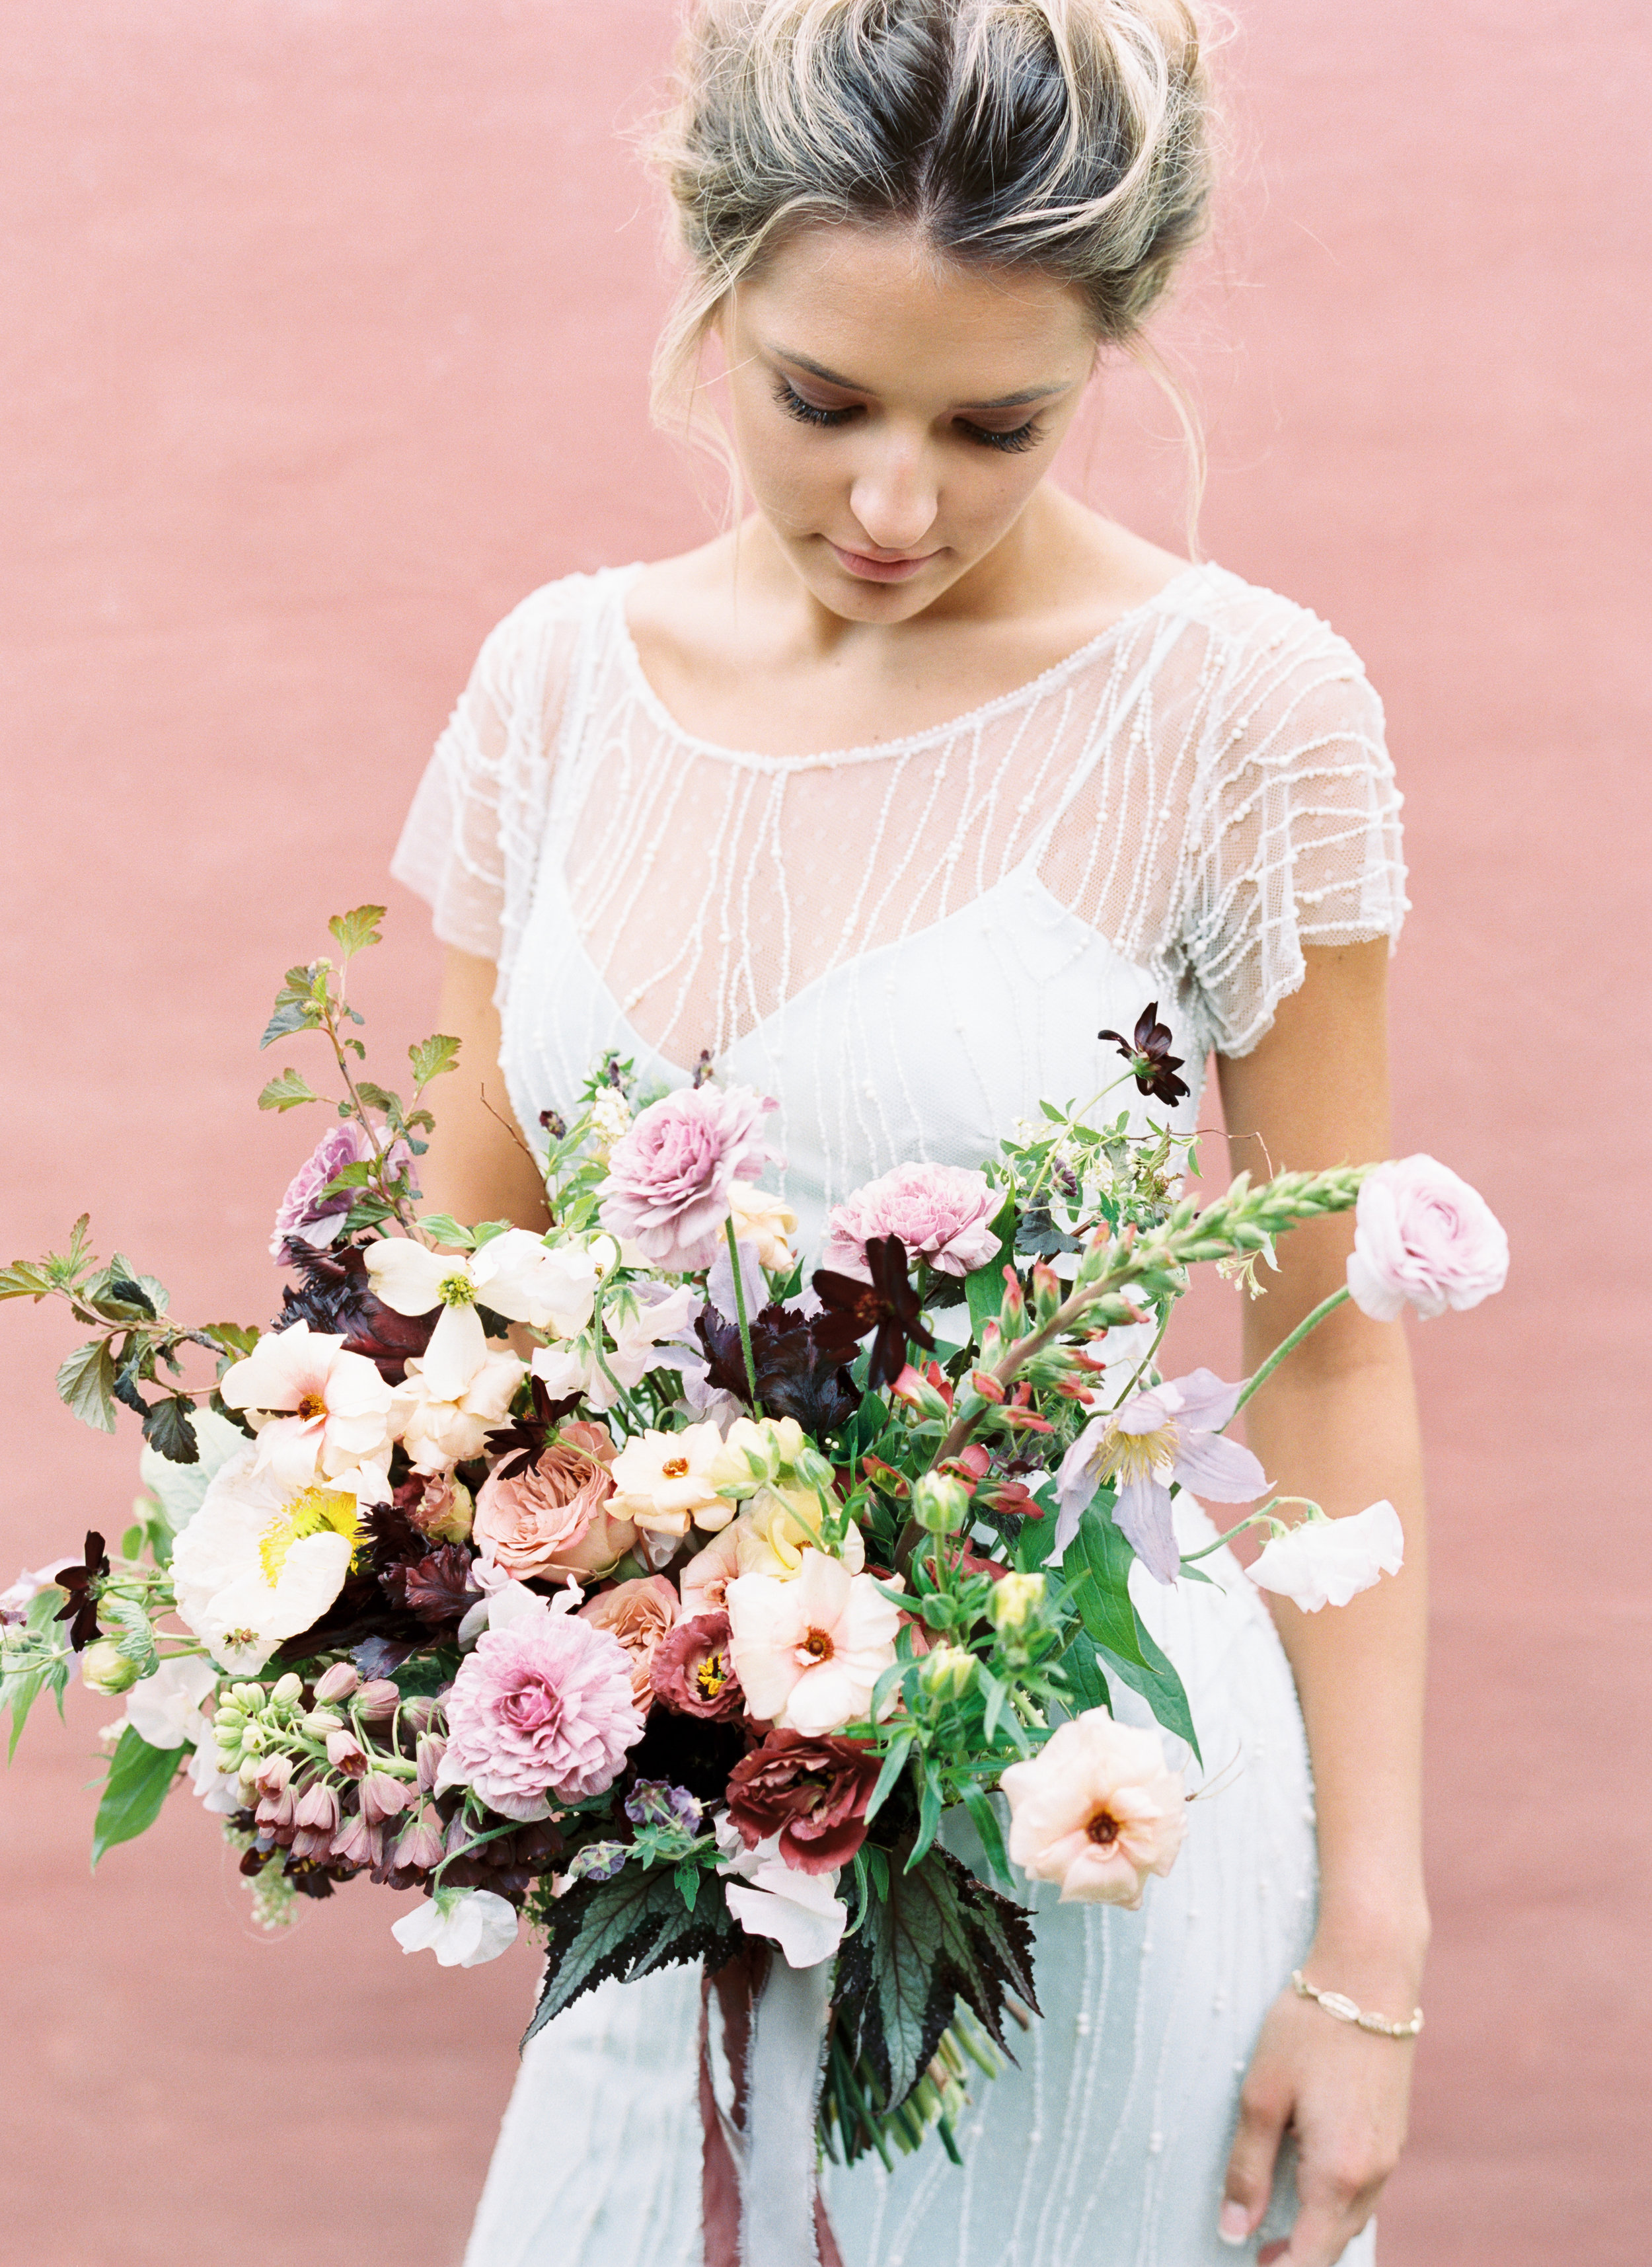 Spring bridal bouquet composed of mauve ranunculus, butterfly ranunculus, fritillaria, Icelandic poppies, sweet peas, and organic greenery. Nashville Wedding Floral Design.